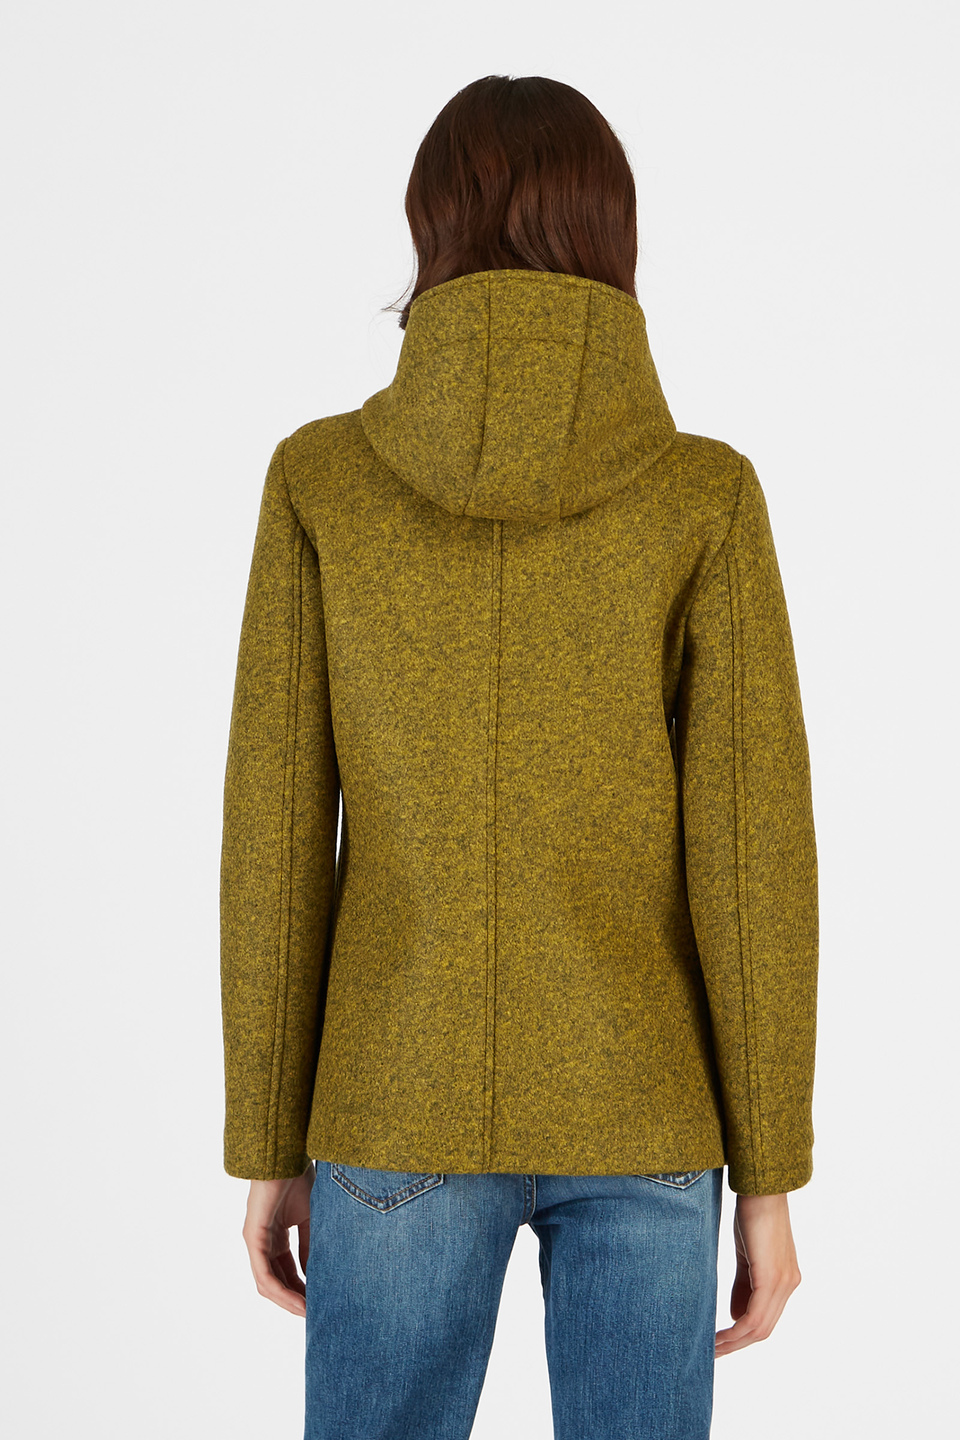 Women’s wool-effect jacket with hood and zip buttons | La Martina - Official Online Shop